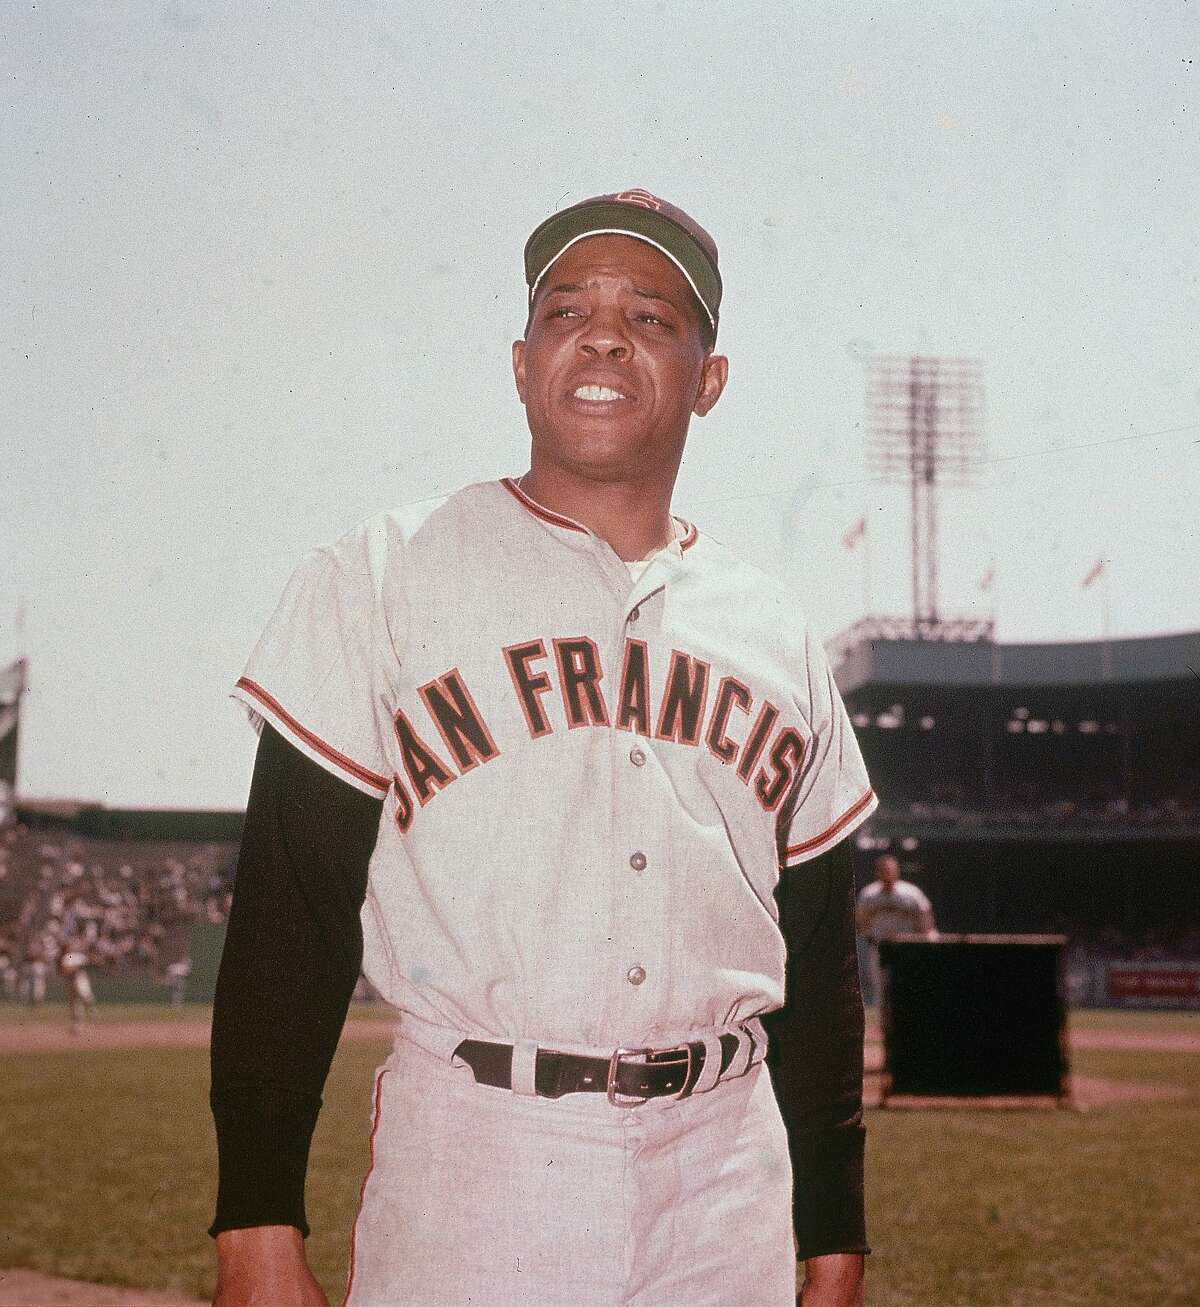 Circa 1958, American baseball player Willie Mays #24 of the San Francisco Giants poses in uniform in a stadium. (Photo by Archive Photos/Getty Images)